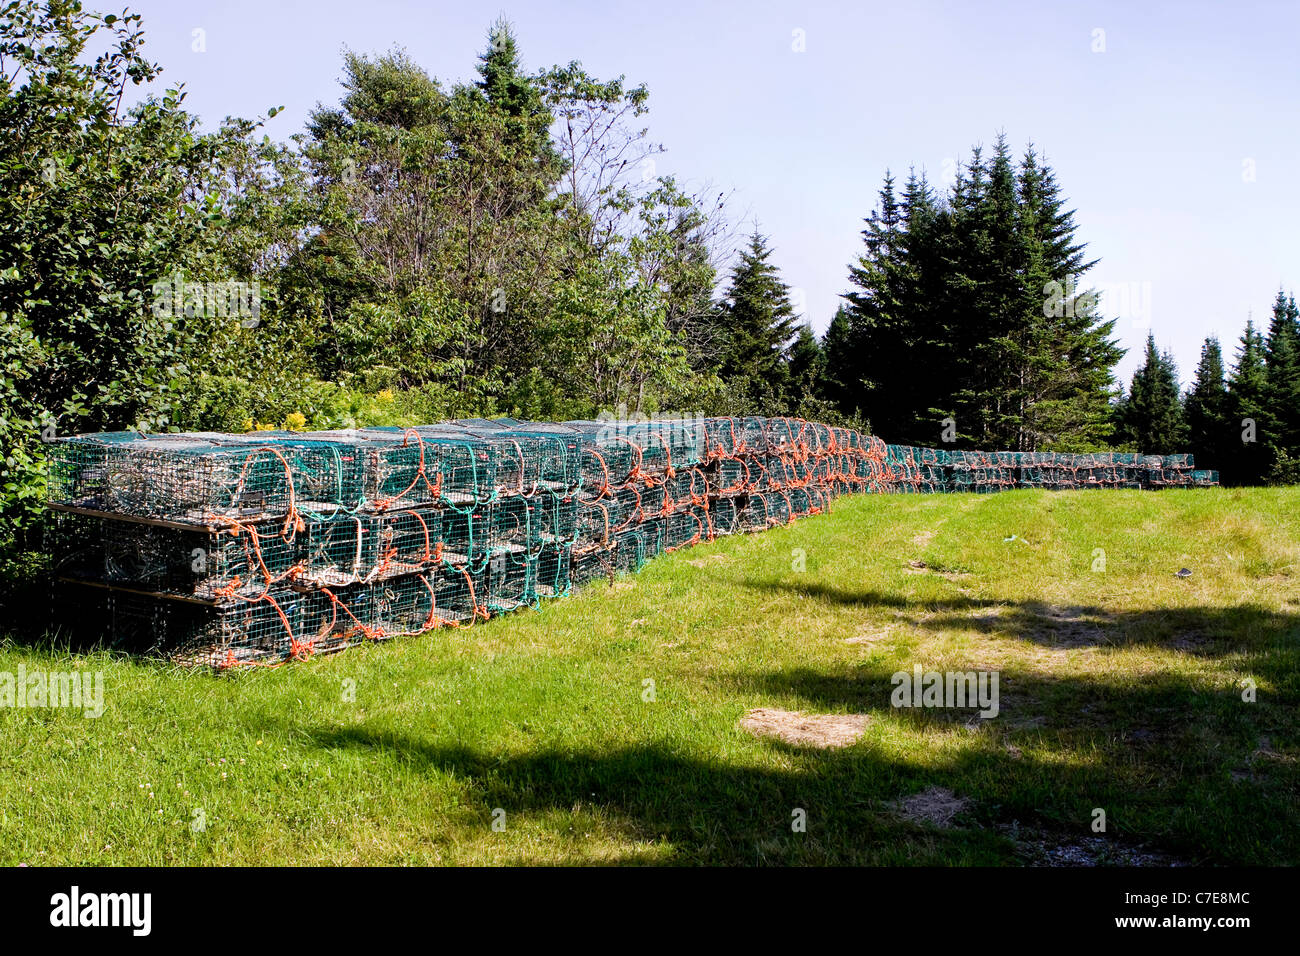 Lobster cages lined up in Bay of Fundy, New Brunswick, Canada. Stock Photo